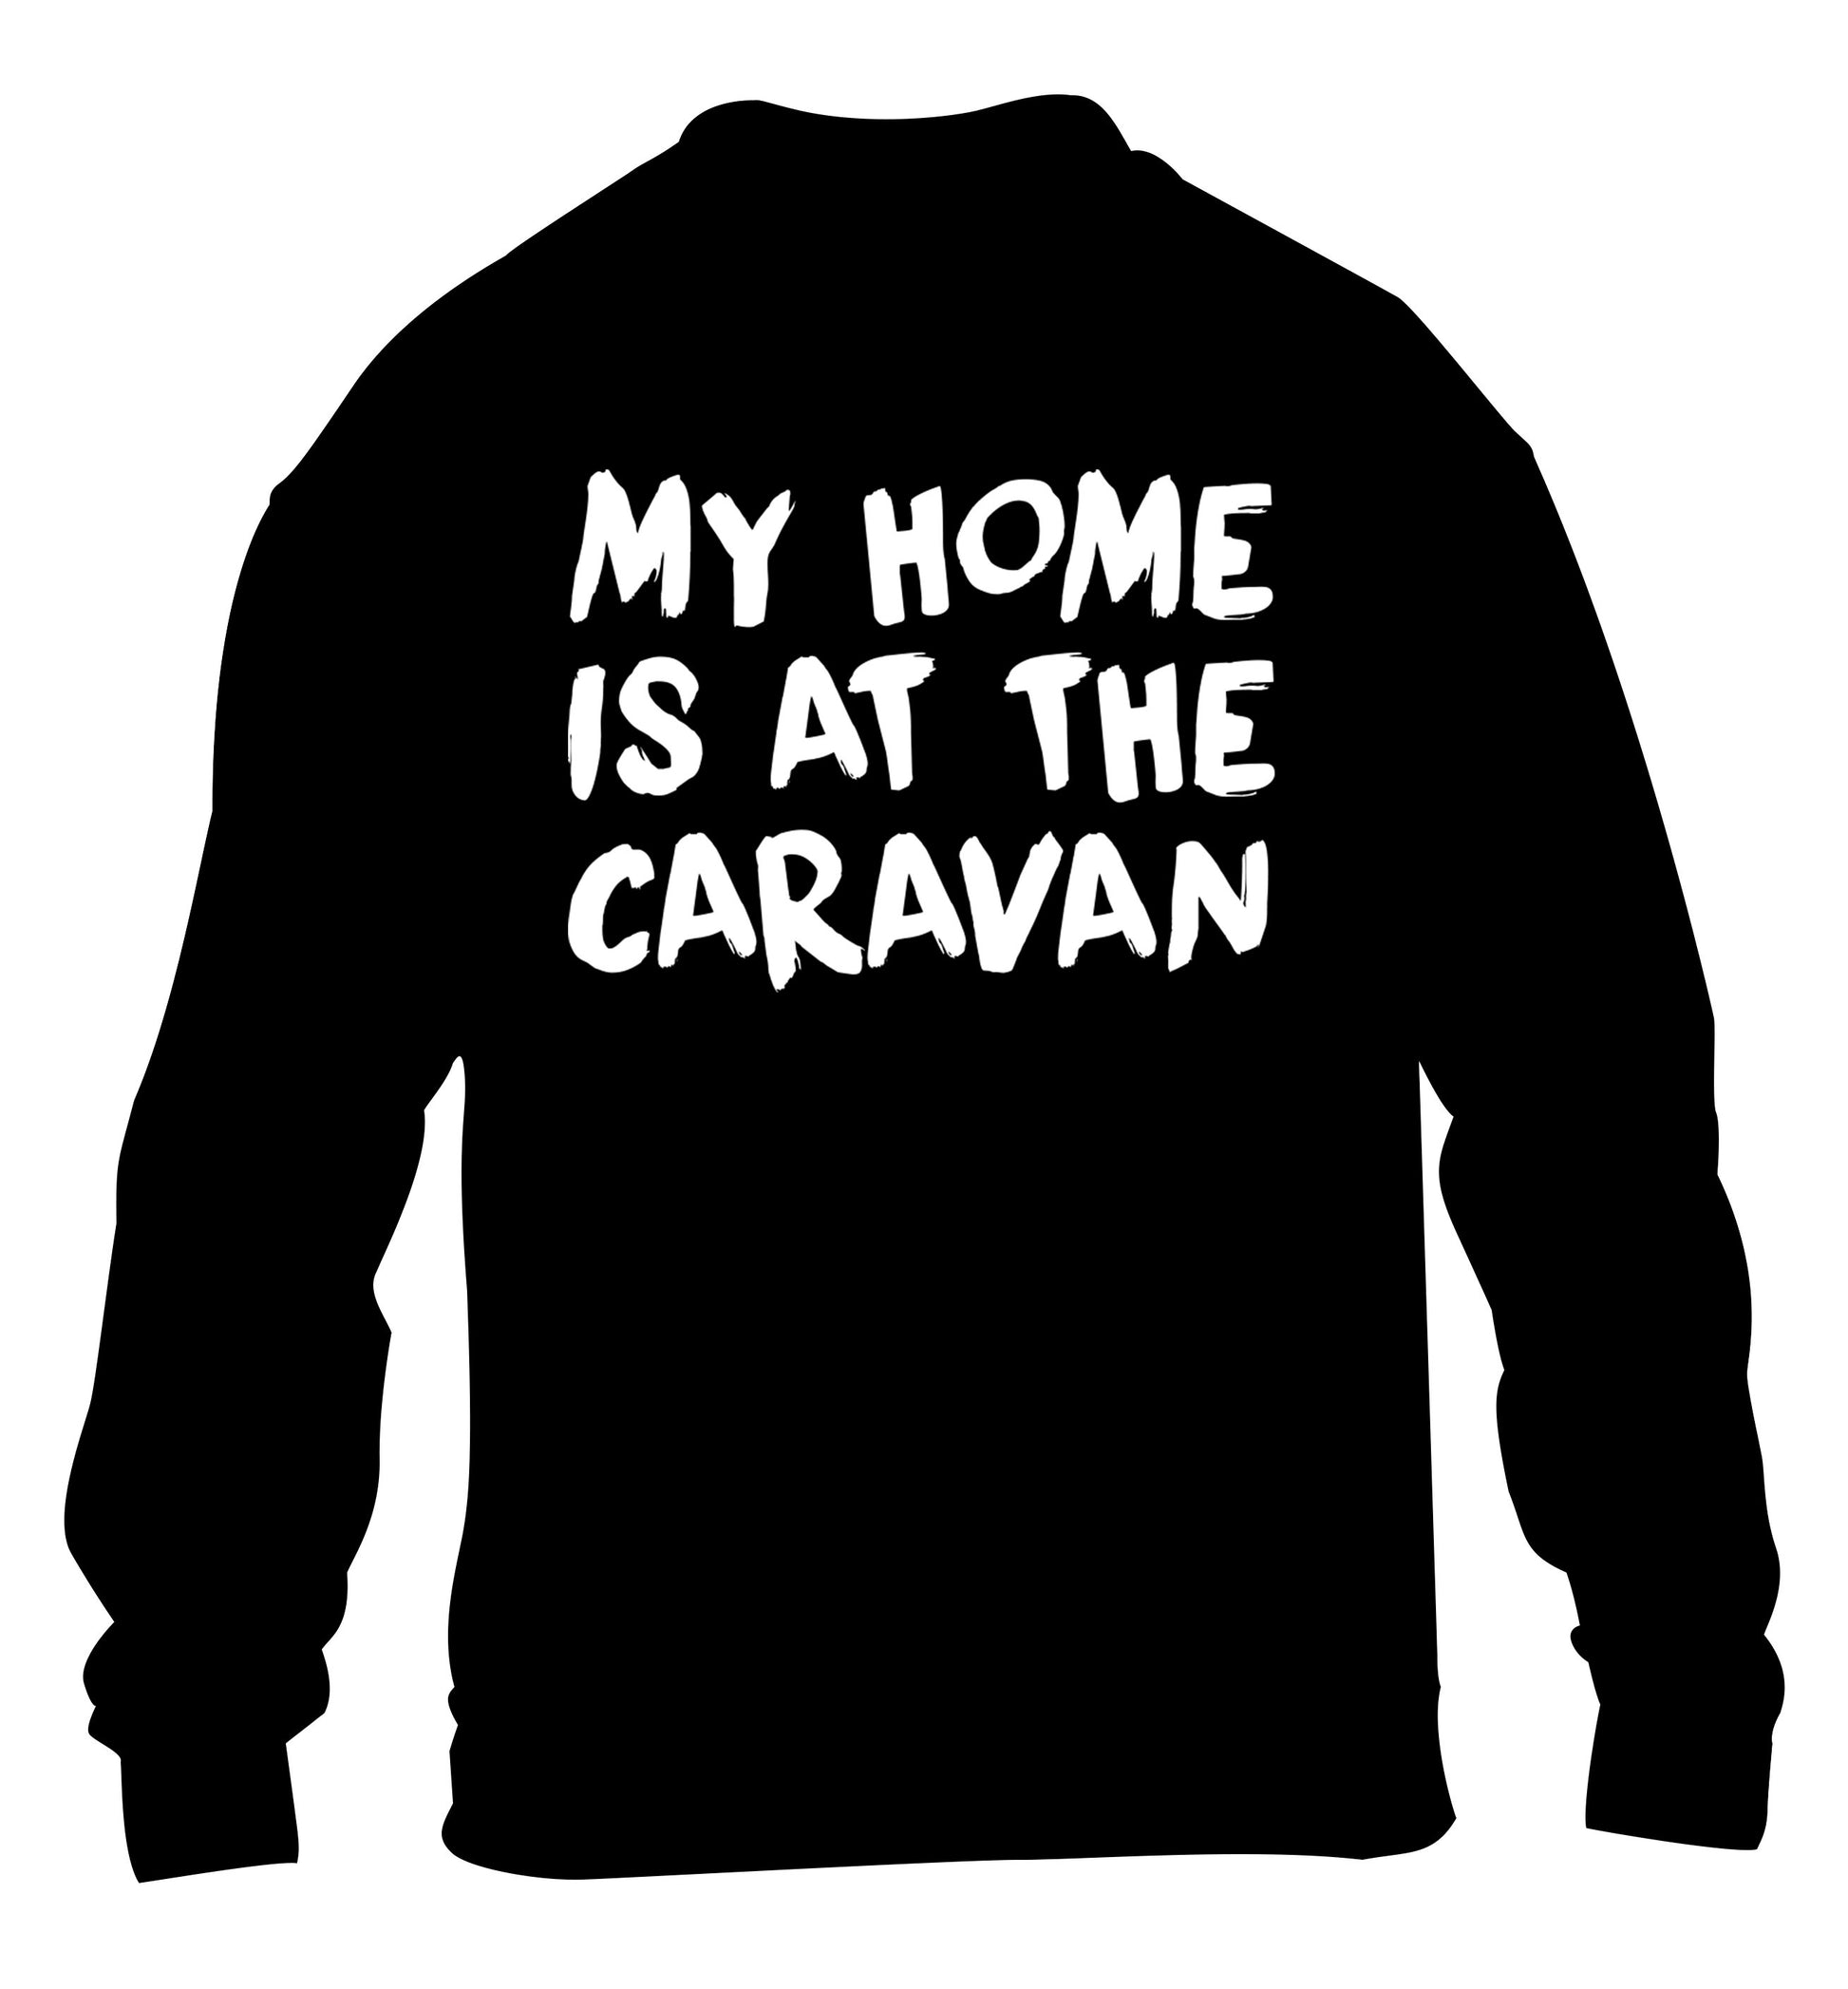 My home is at the caravan children's black sweater 12-14 Years